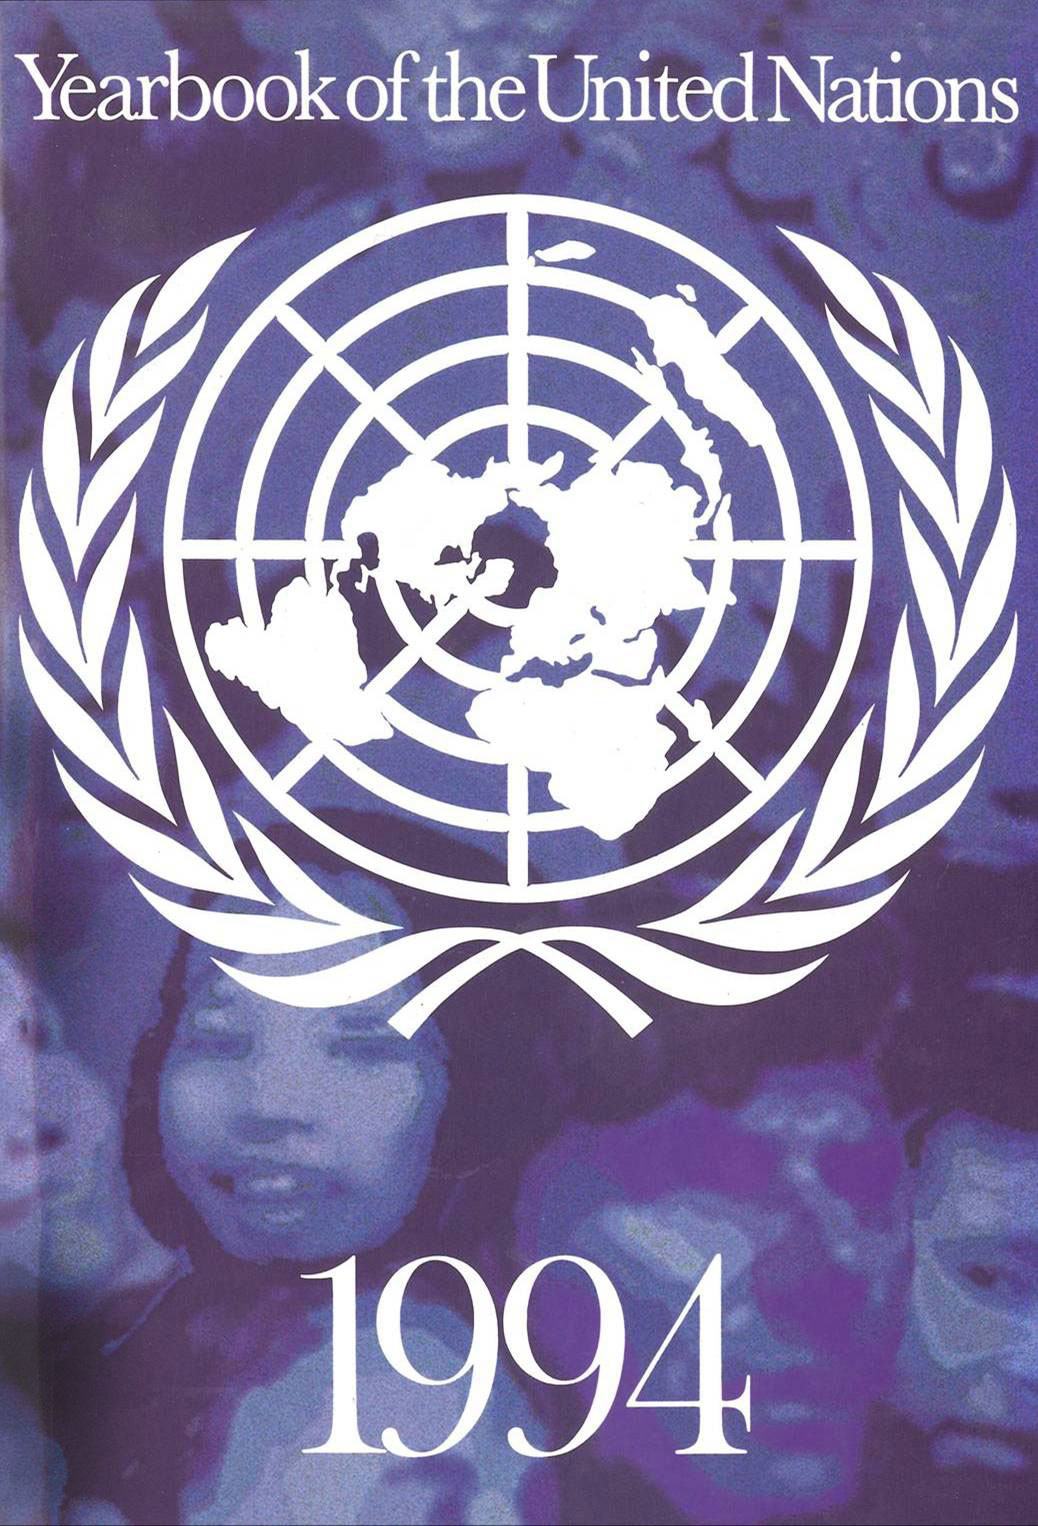 image of Yearbook of the United Nations 1994